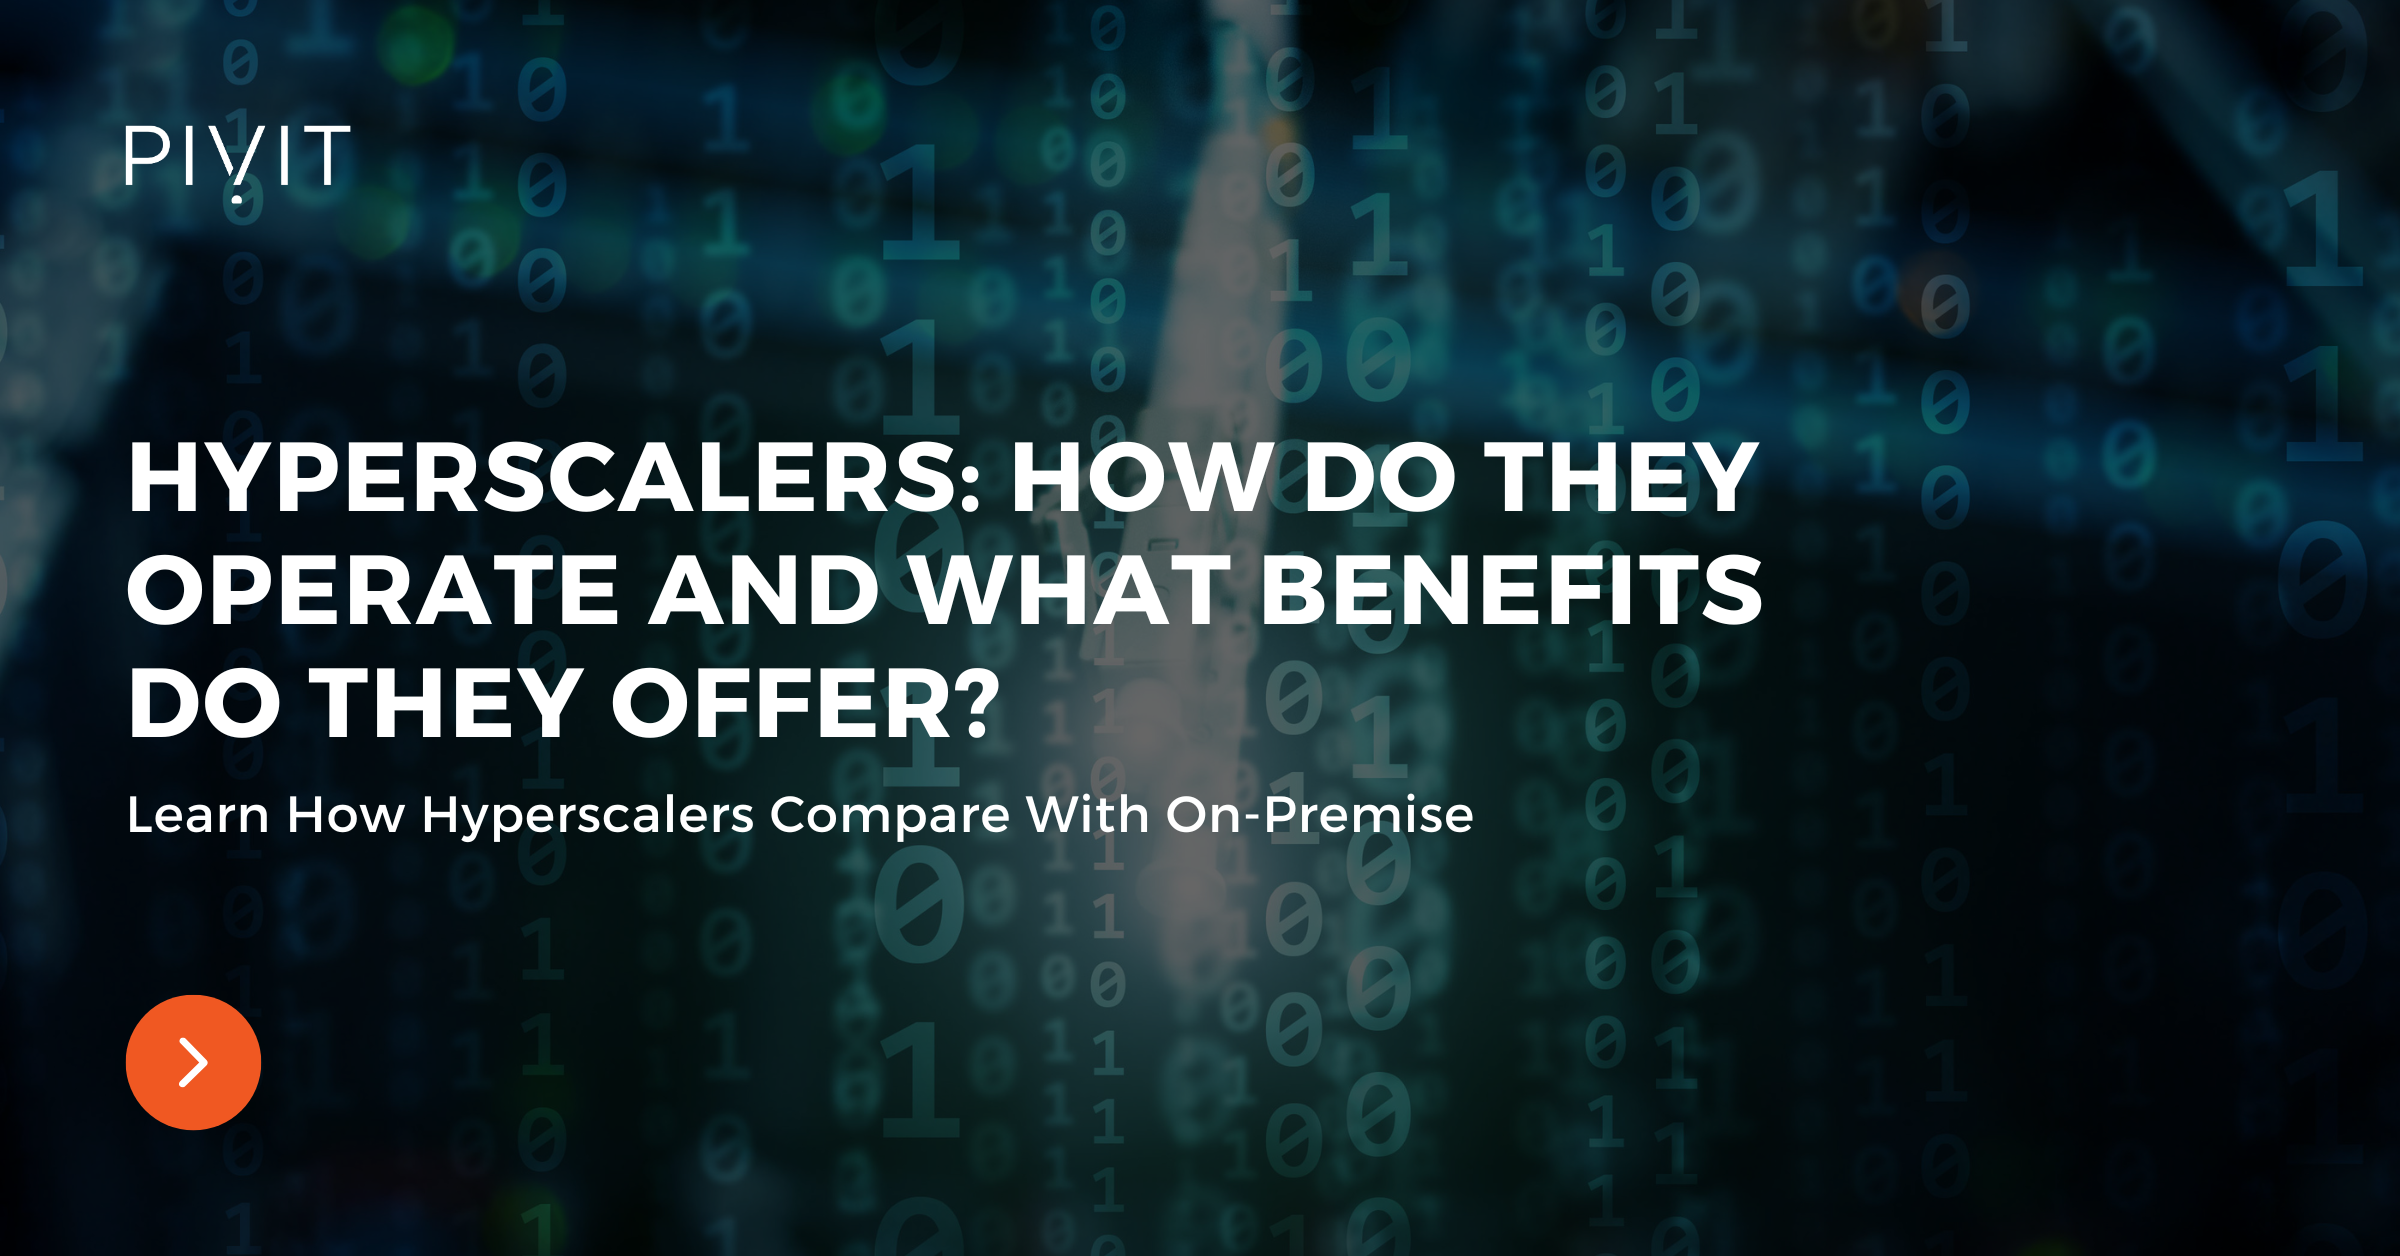 Hyperscalers: How Do They Operate and What Benefits Do They Offer